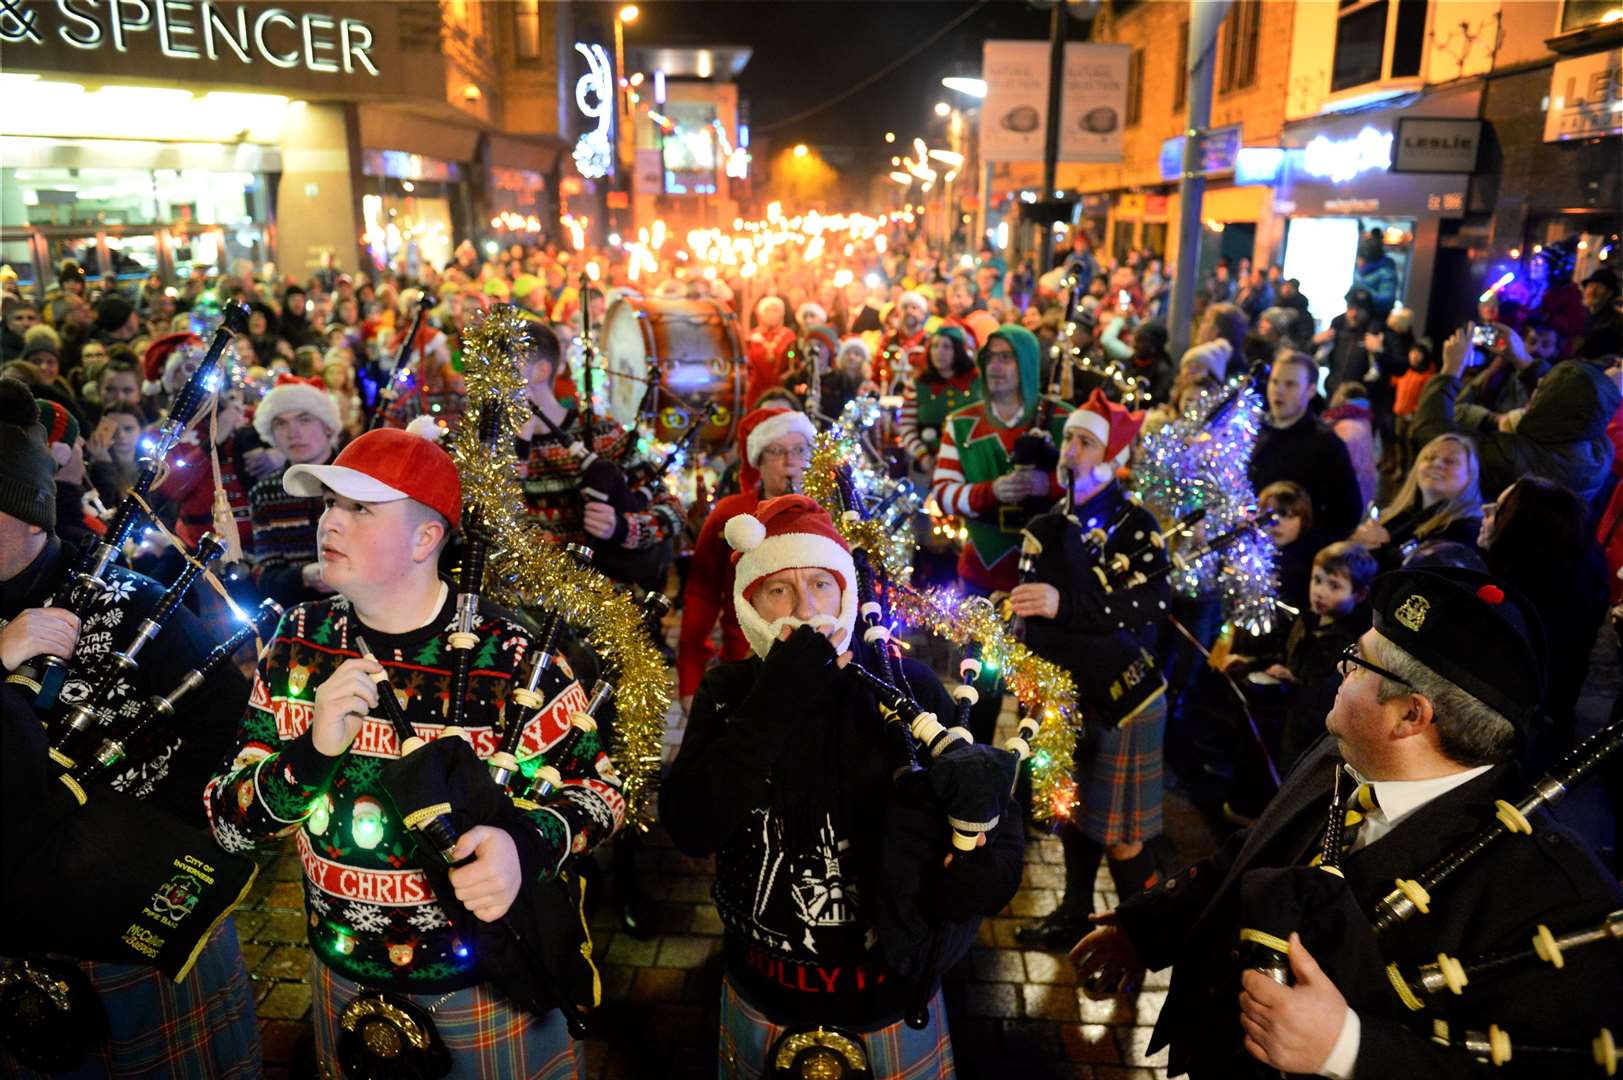 The Christmas lights switch on and torchlight procession always brings crowds to the city centre.